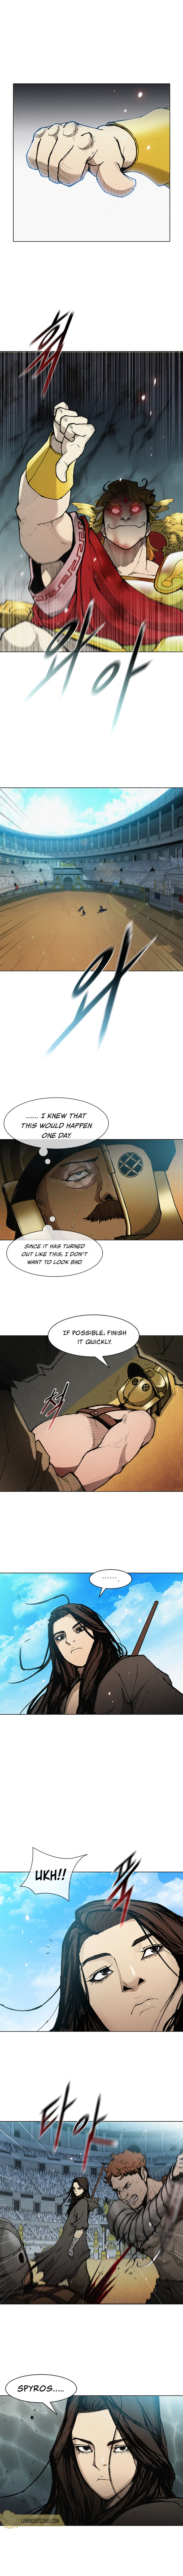 Long Way of the Warrior - Chapter 18 Page 4